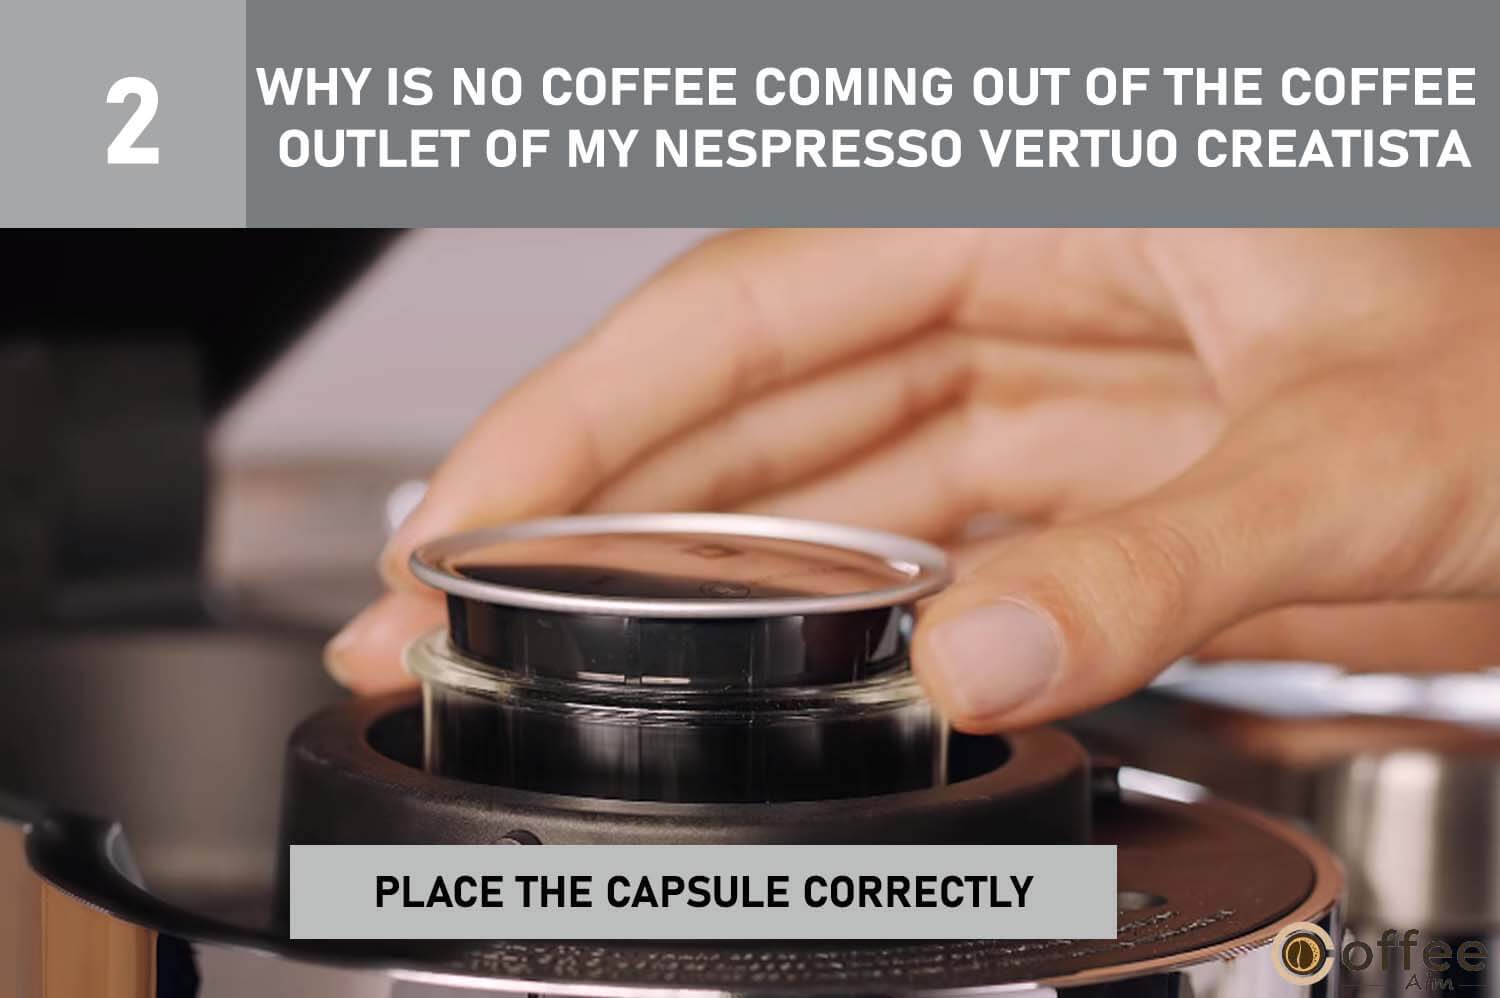 The image shows how to put the coffee capsule in the Nespresso machine correctly. It's vital for fixing coffee issues.